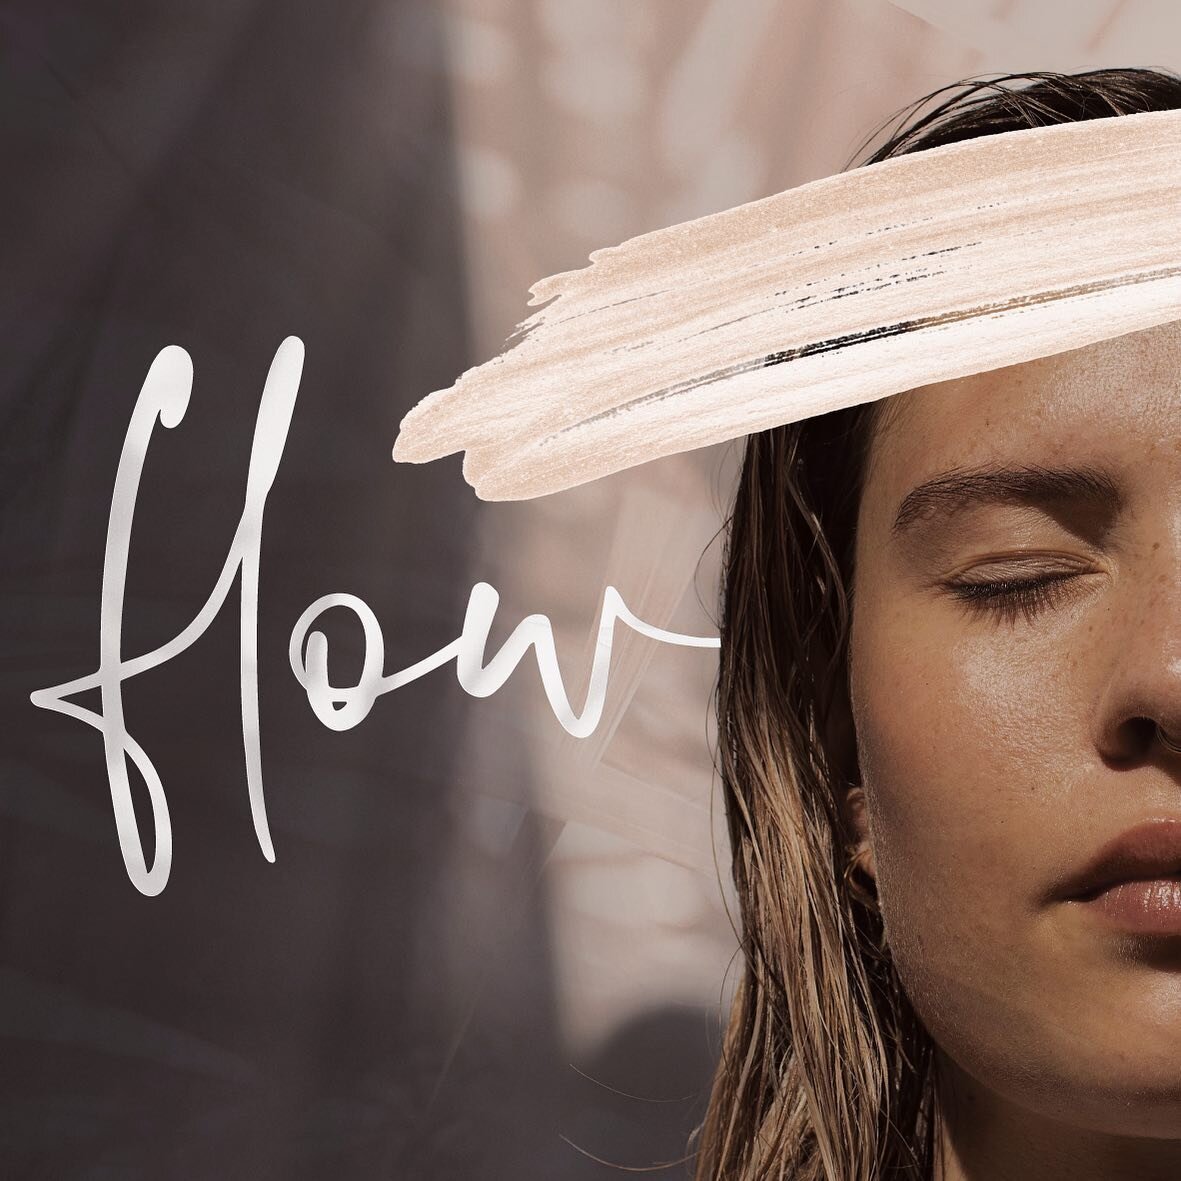 ✨Flow State✨ Have you ever found yourself doing something, looking up at the clock and realising hours have gone by? Chances are you were in a flow state, or &lsquo;in the zone&rsquo;. I&rsquo;ve always been really interested in the idea of being in 